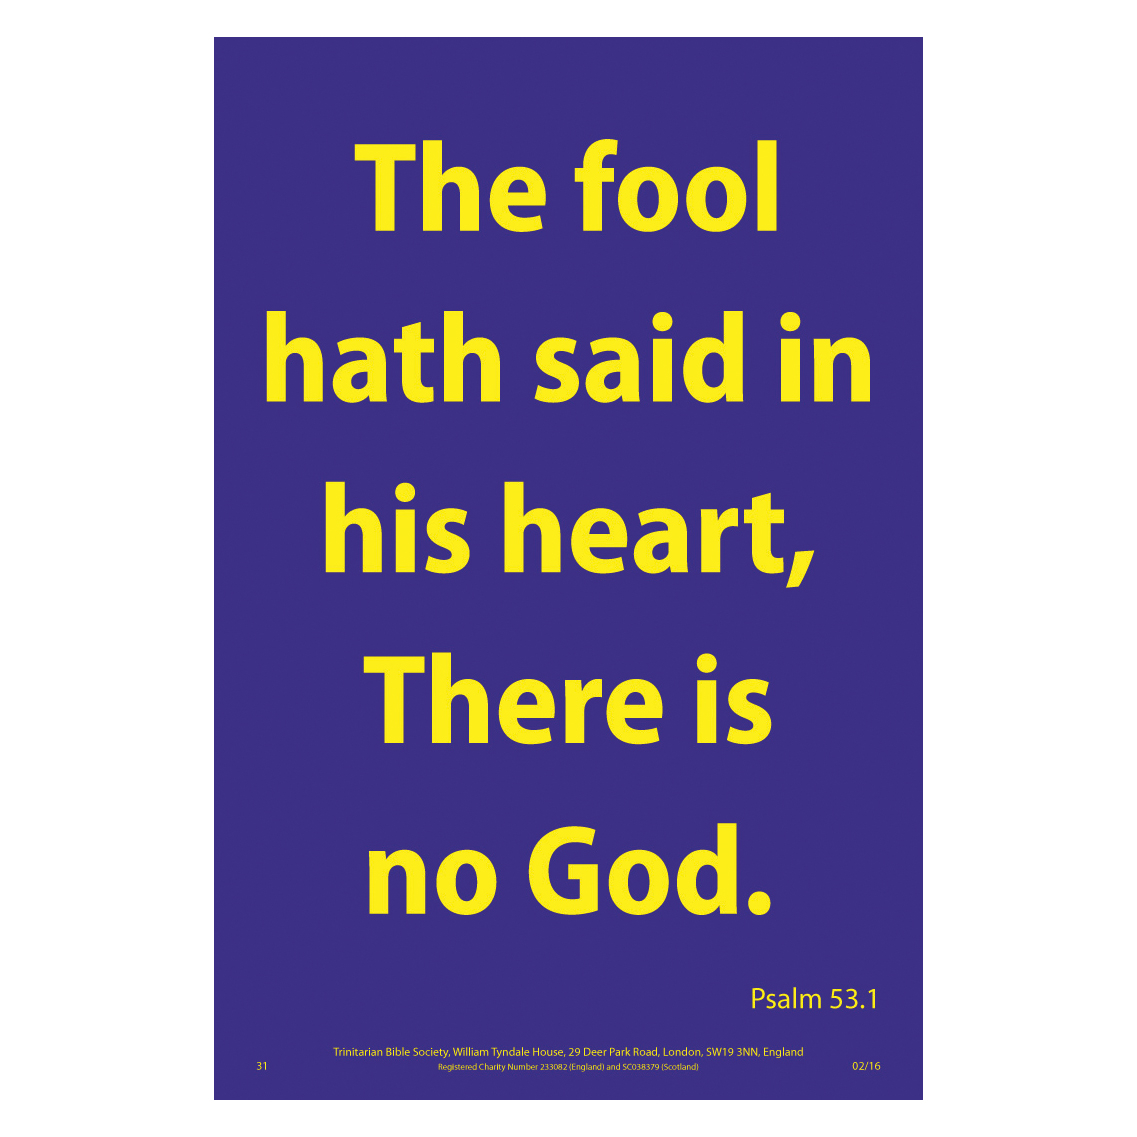 Waterproof Scripture Poster - The fool hath said in his heart, There is no God - Psalm 53.1